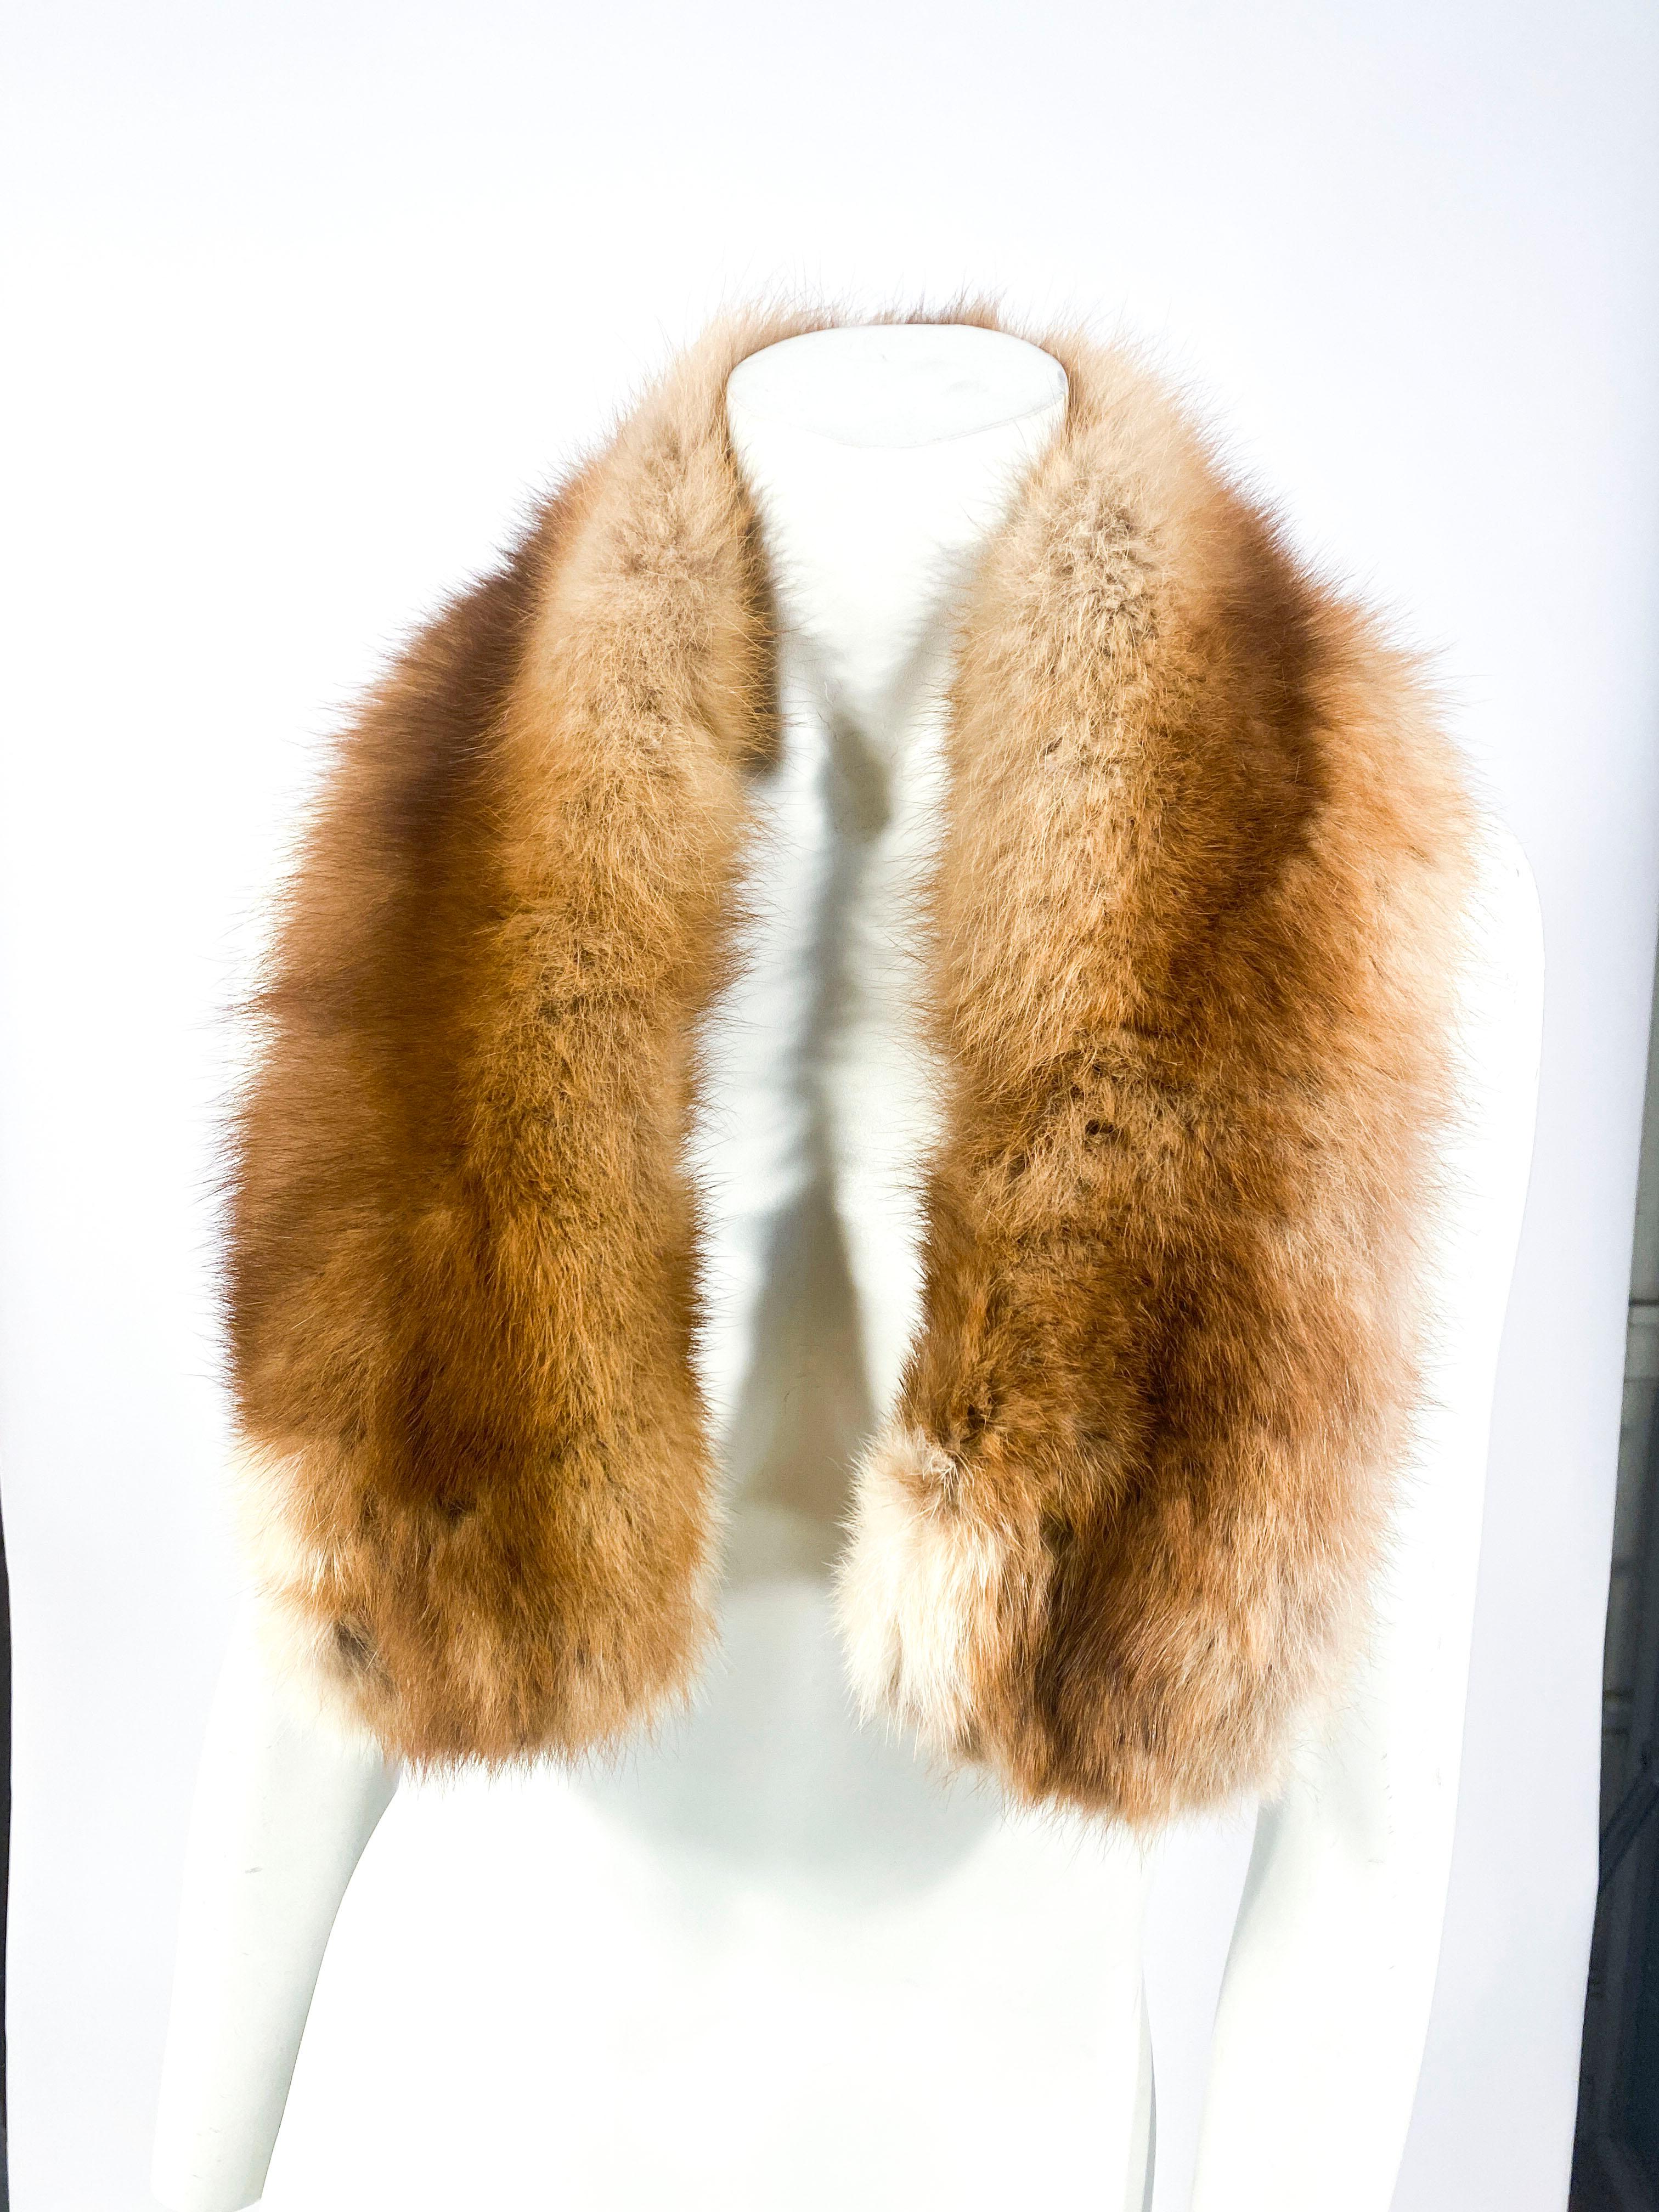 Apricot colored nutria fur that may be worn as a scarf or an enlarged collar. The piece is lined with brown velvet and are detached a places for a holder and has traditional collar clips. 